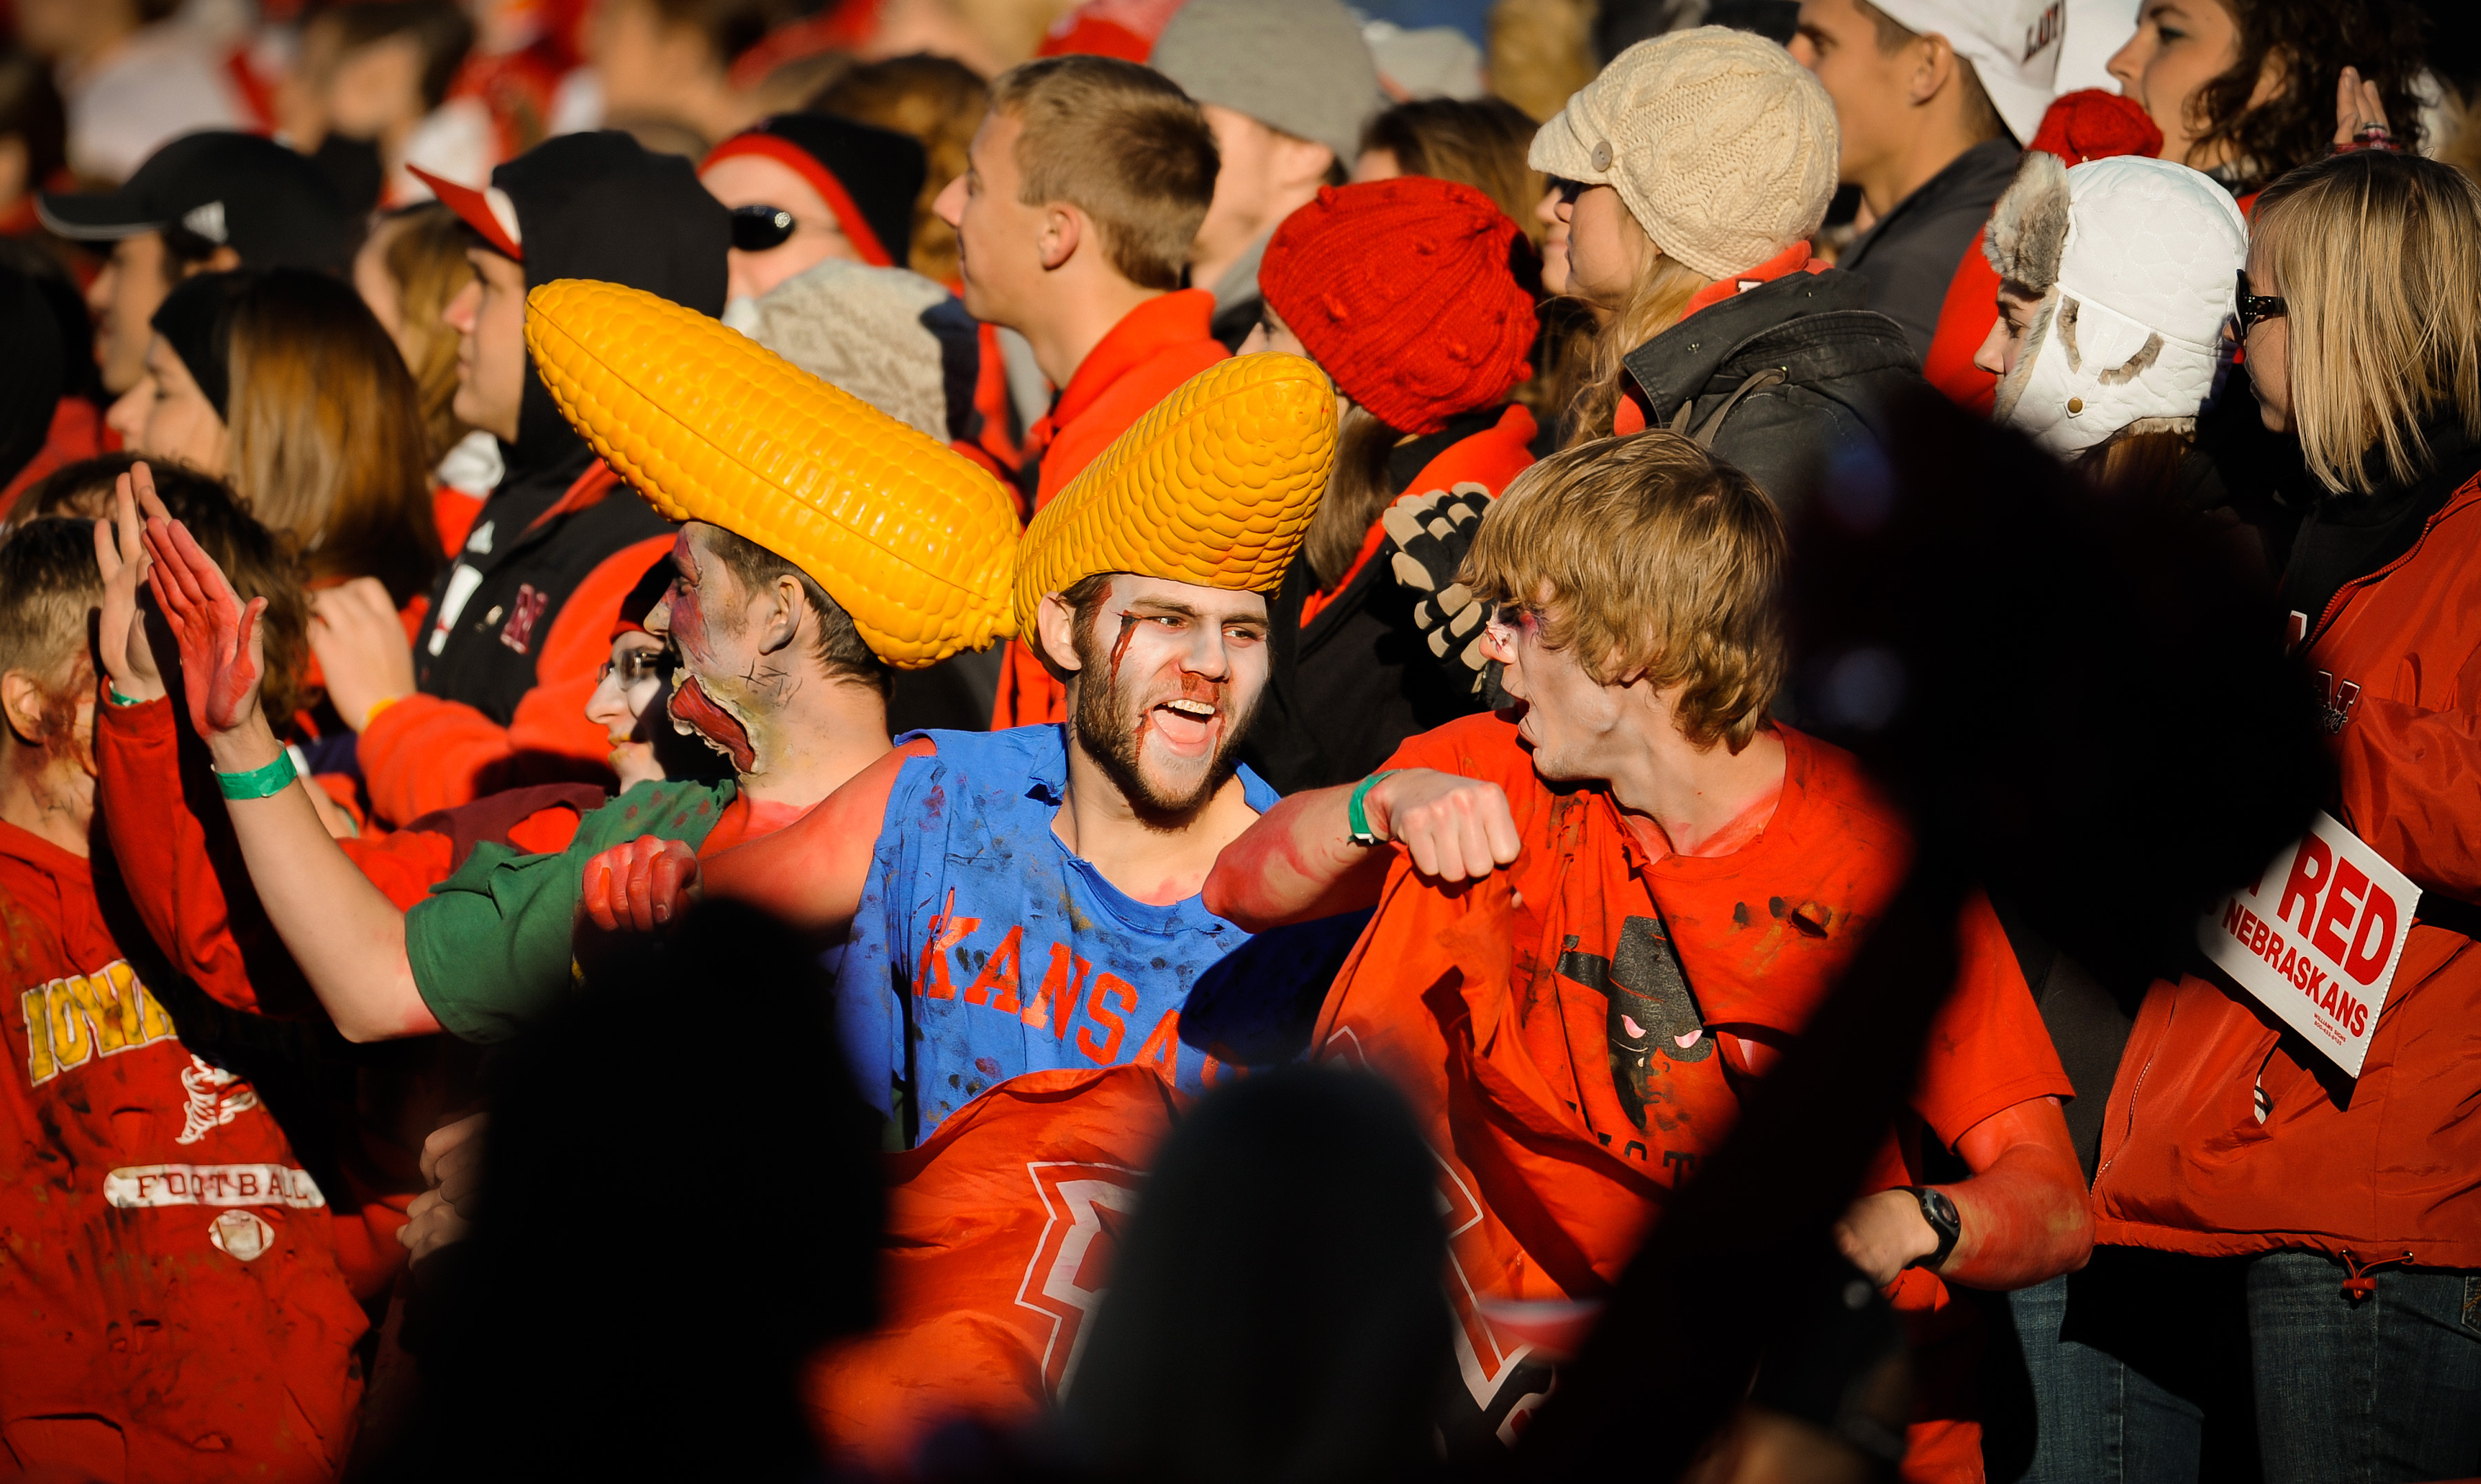 LINCOLN, NE - NOVEMBER 26: Nebraska Cornhusker fans celebrate another touchdown during their game against the Colorado Buffaloes at Memorial Stadium on November 26, 2010 in Lincoln, Nebraska. Nebraska defeated Colorado 45-17 (Photo by Eric Francis/Getty I